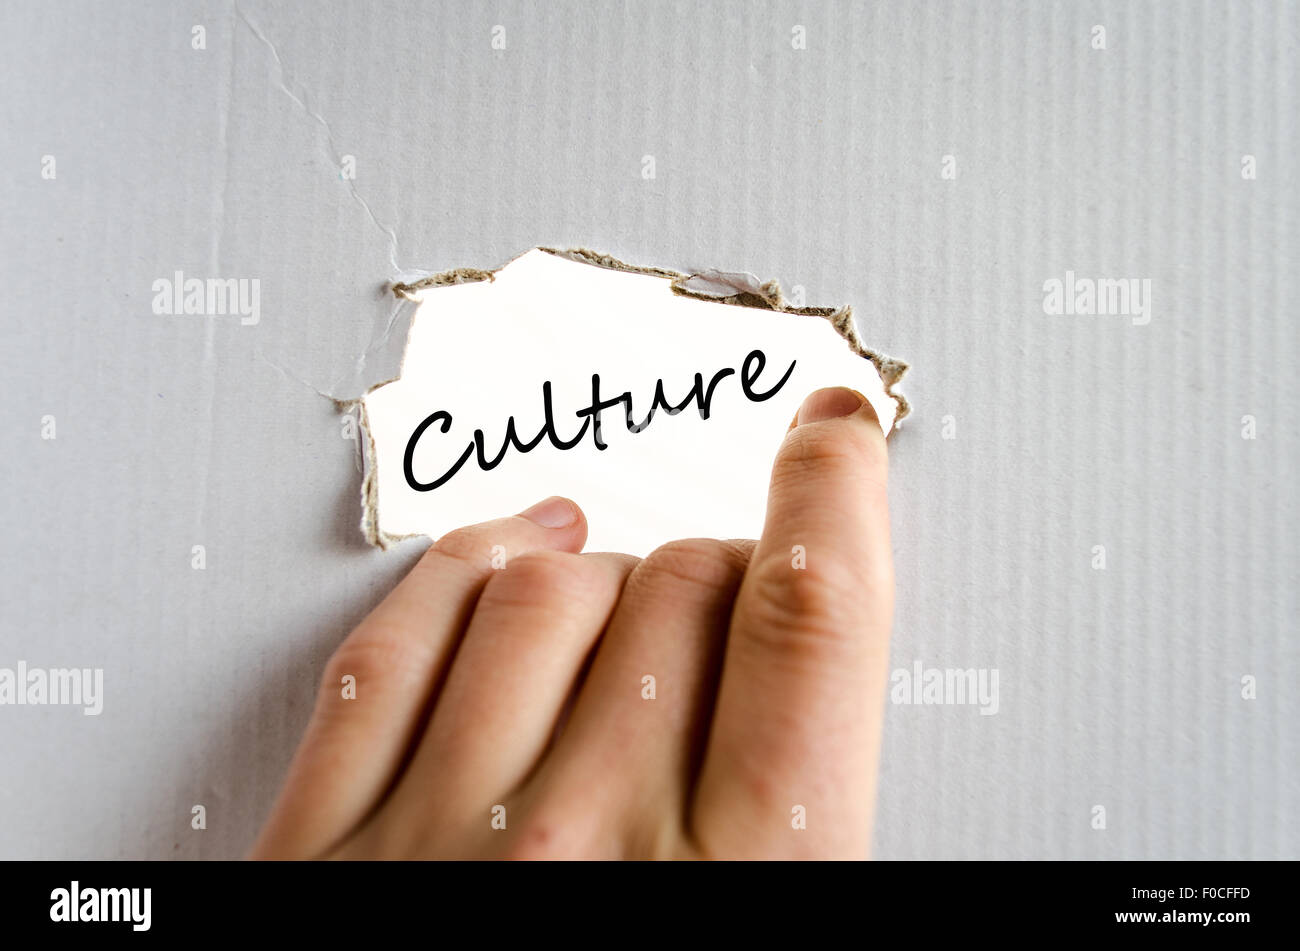 Culture text concept isolated over white background Stock Photo